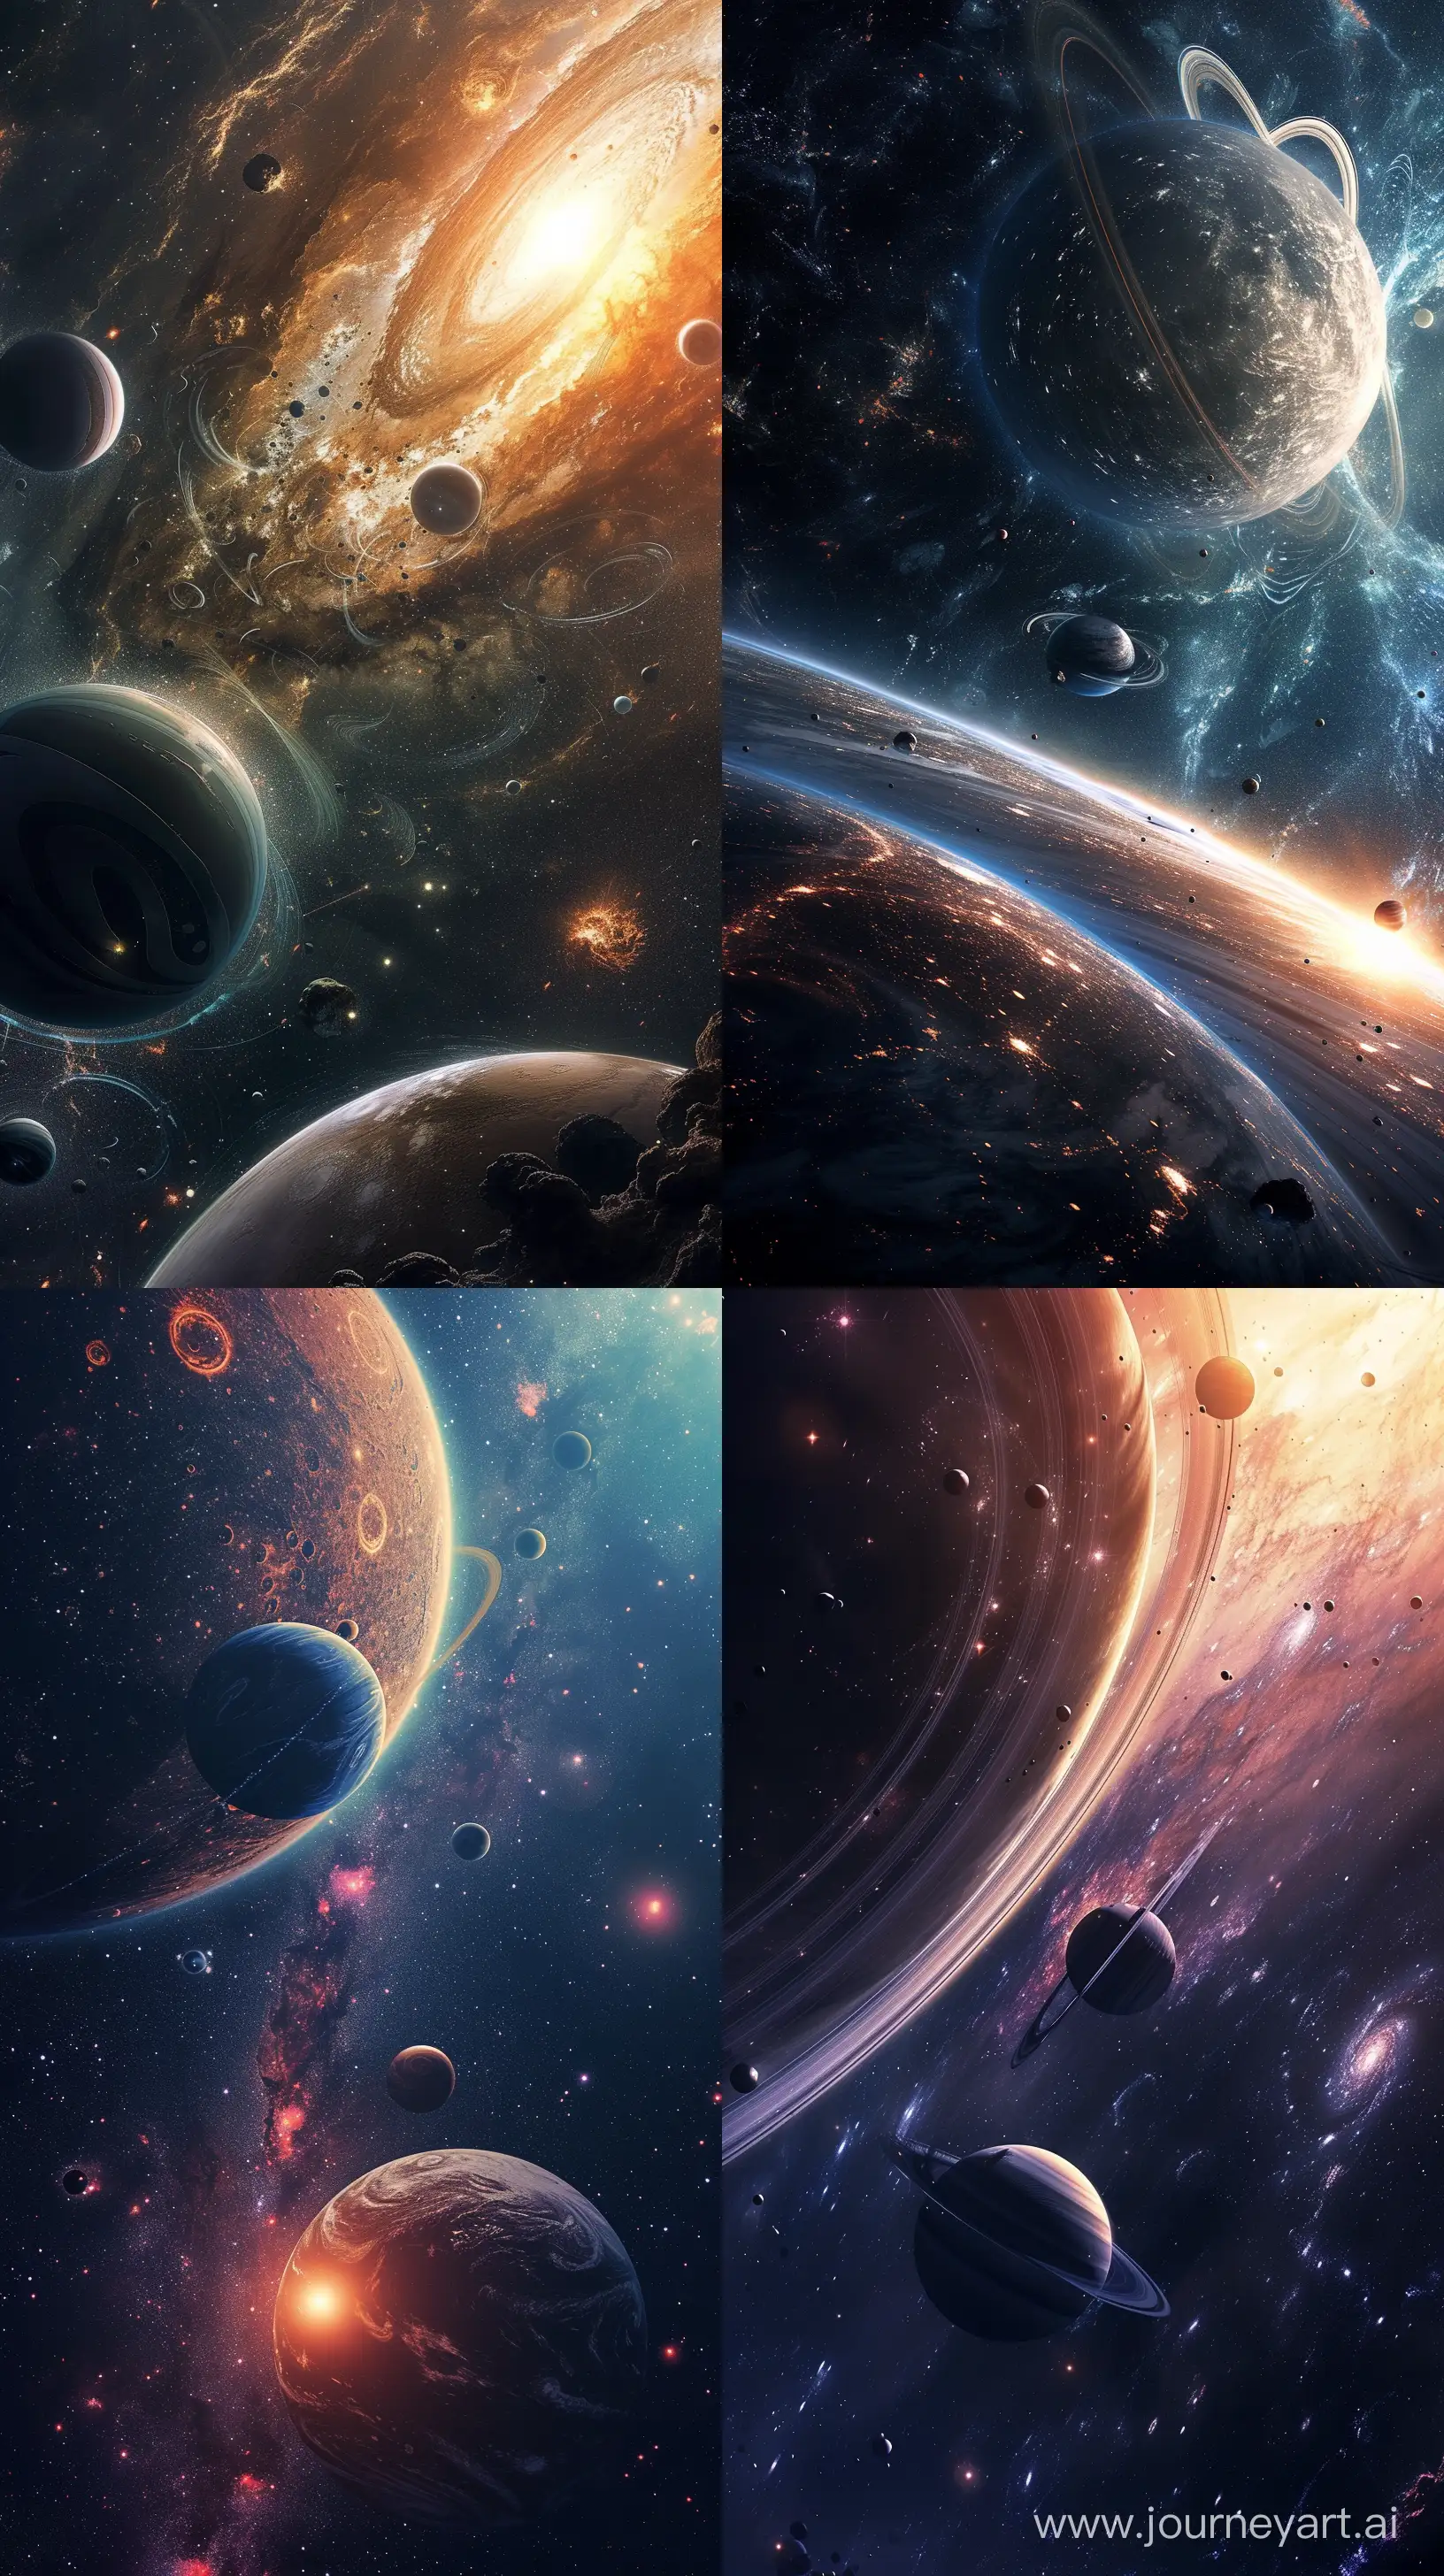 Mesmerizing-8K-Cosmos-Planets-Orbiting-in-Exquisite-Detail